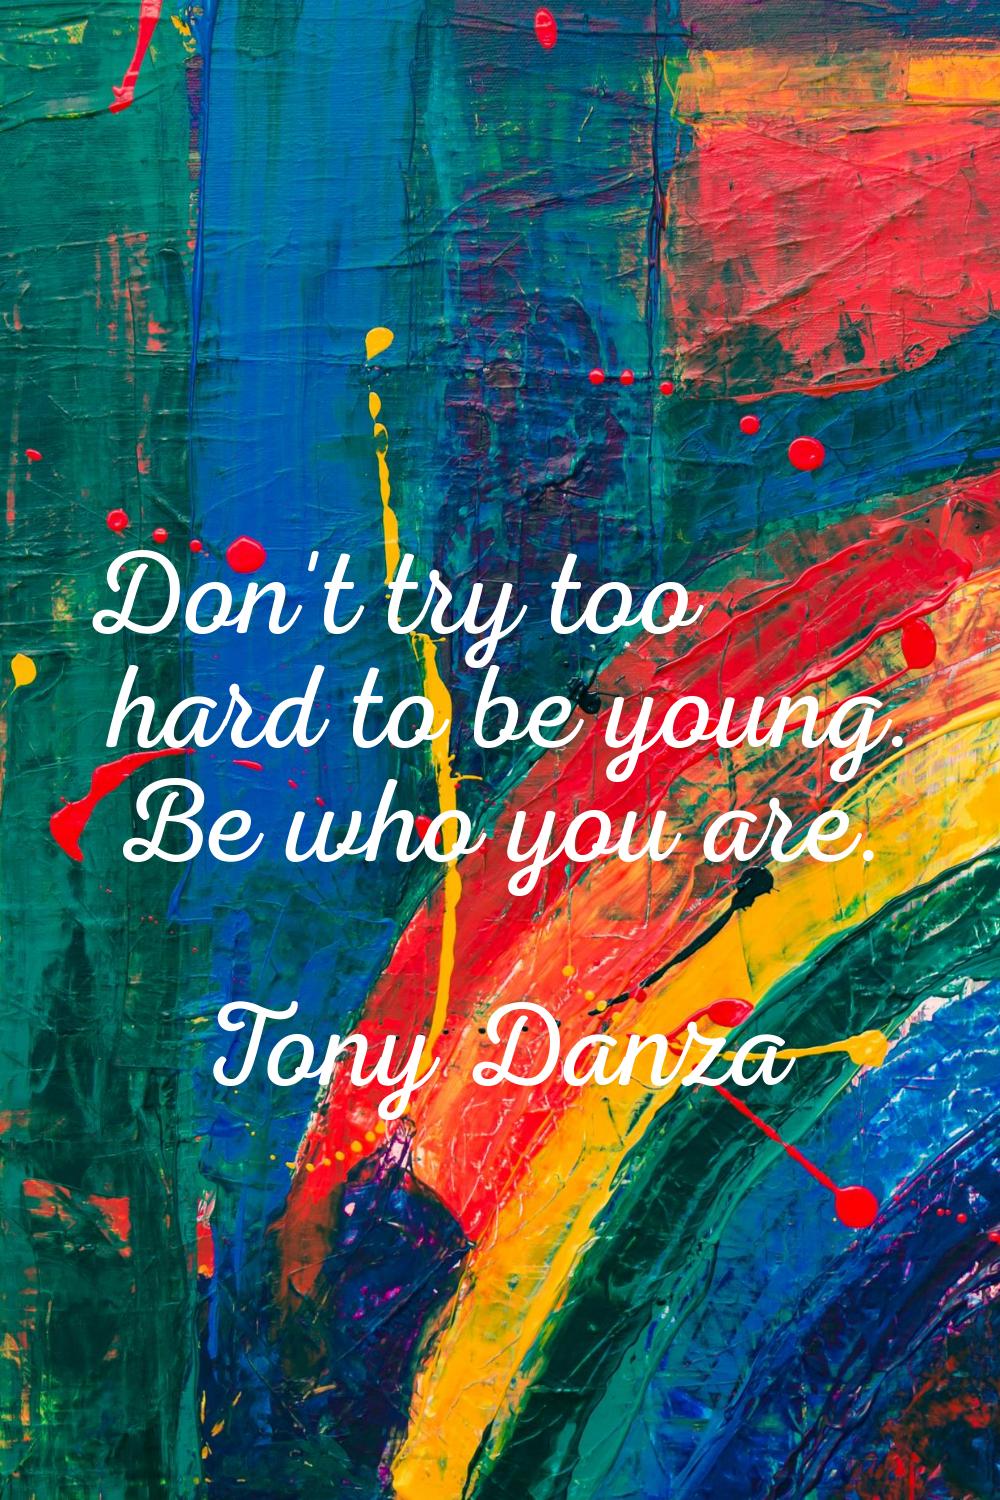 Don't try too hard to be young. Be who you are.